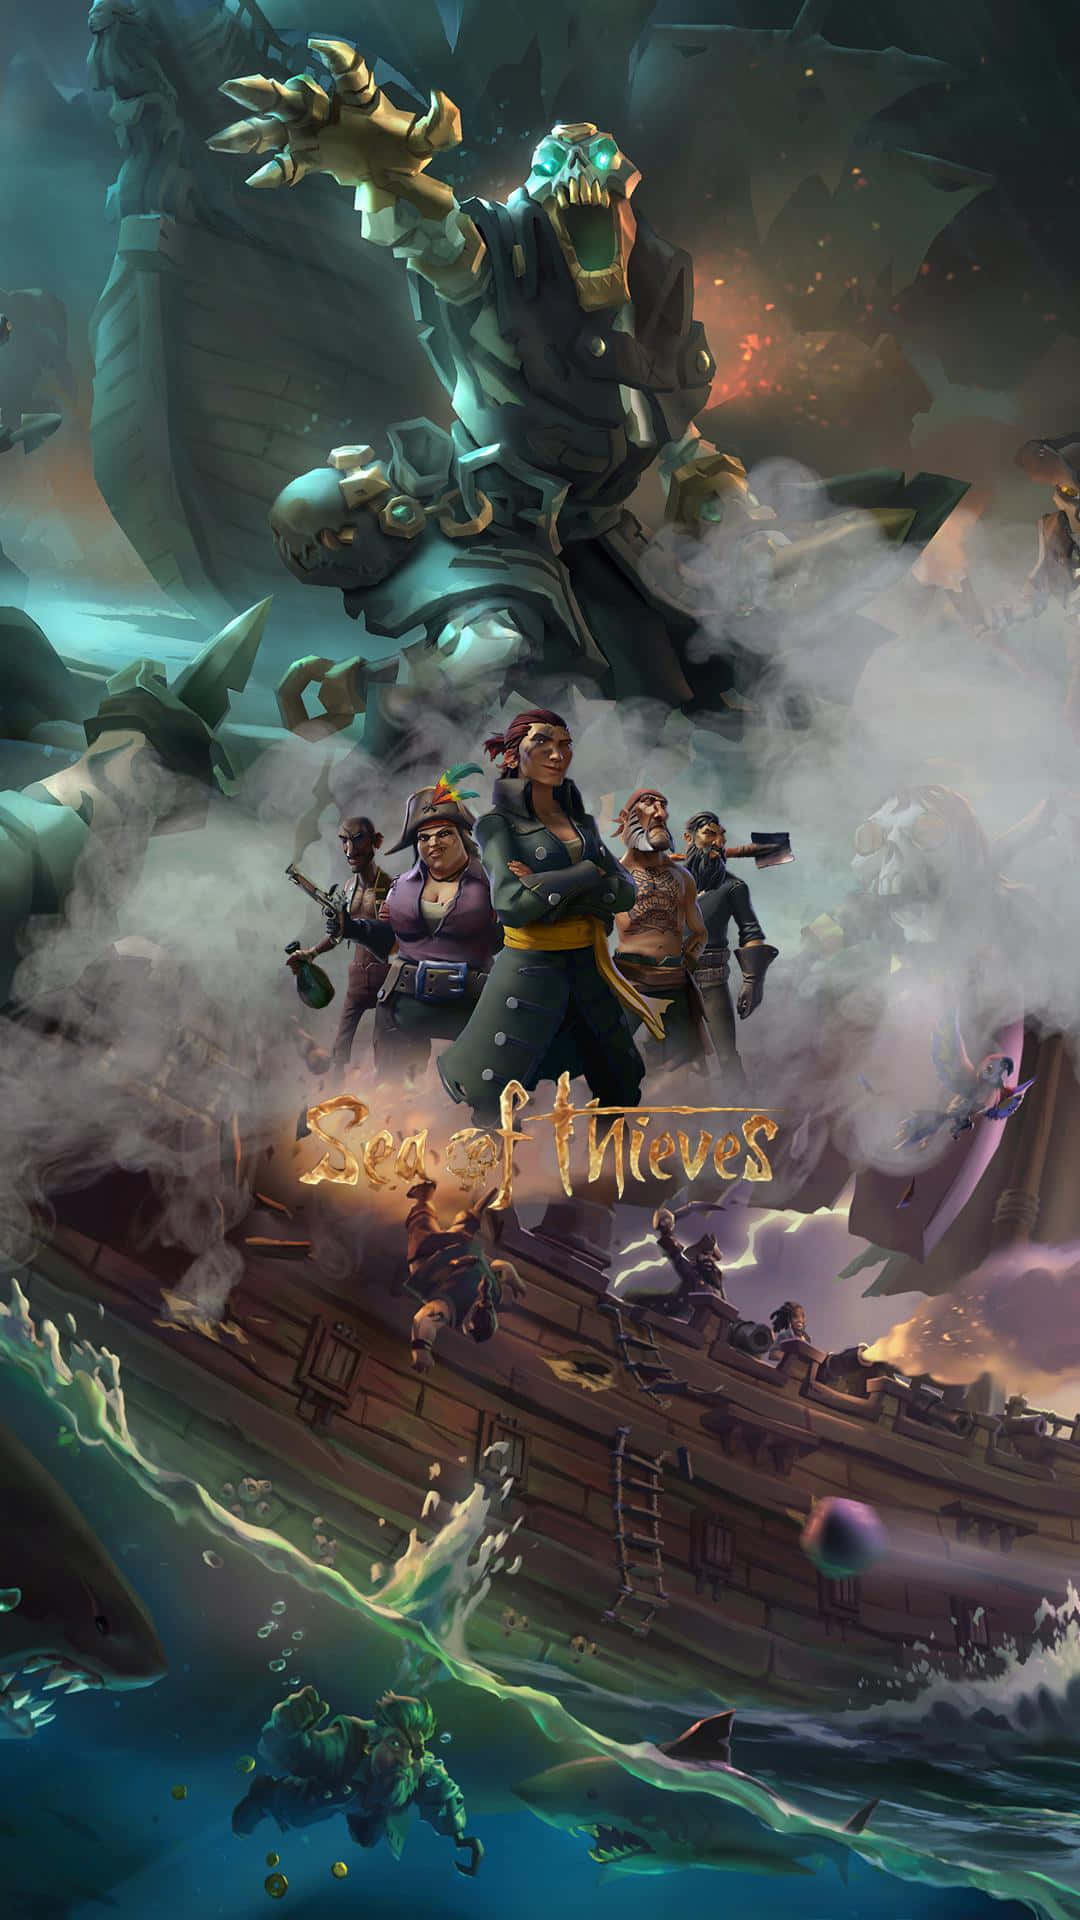 Seaof Thieves Handyhülle Wallpaper